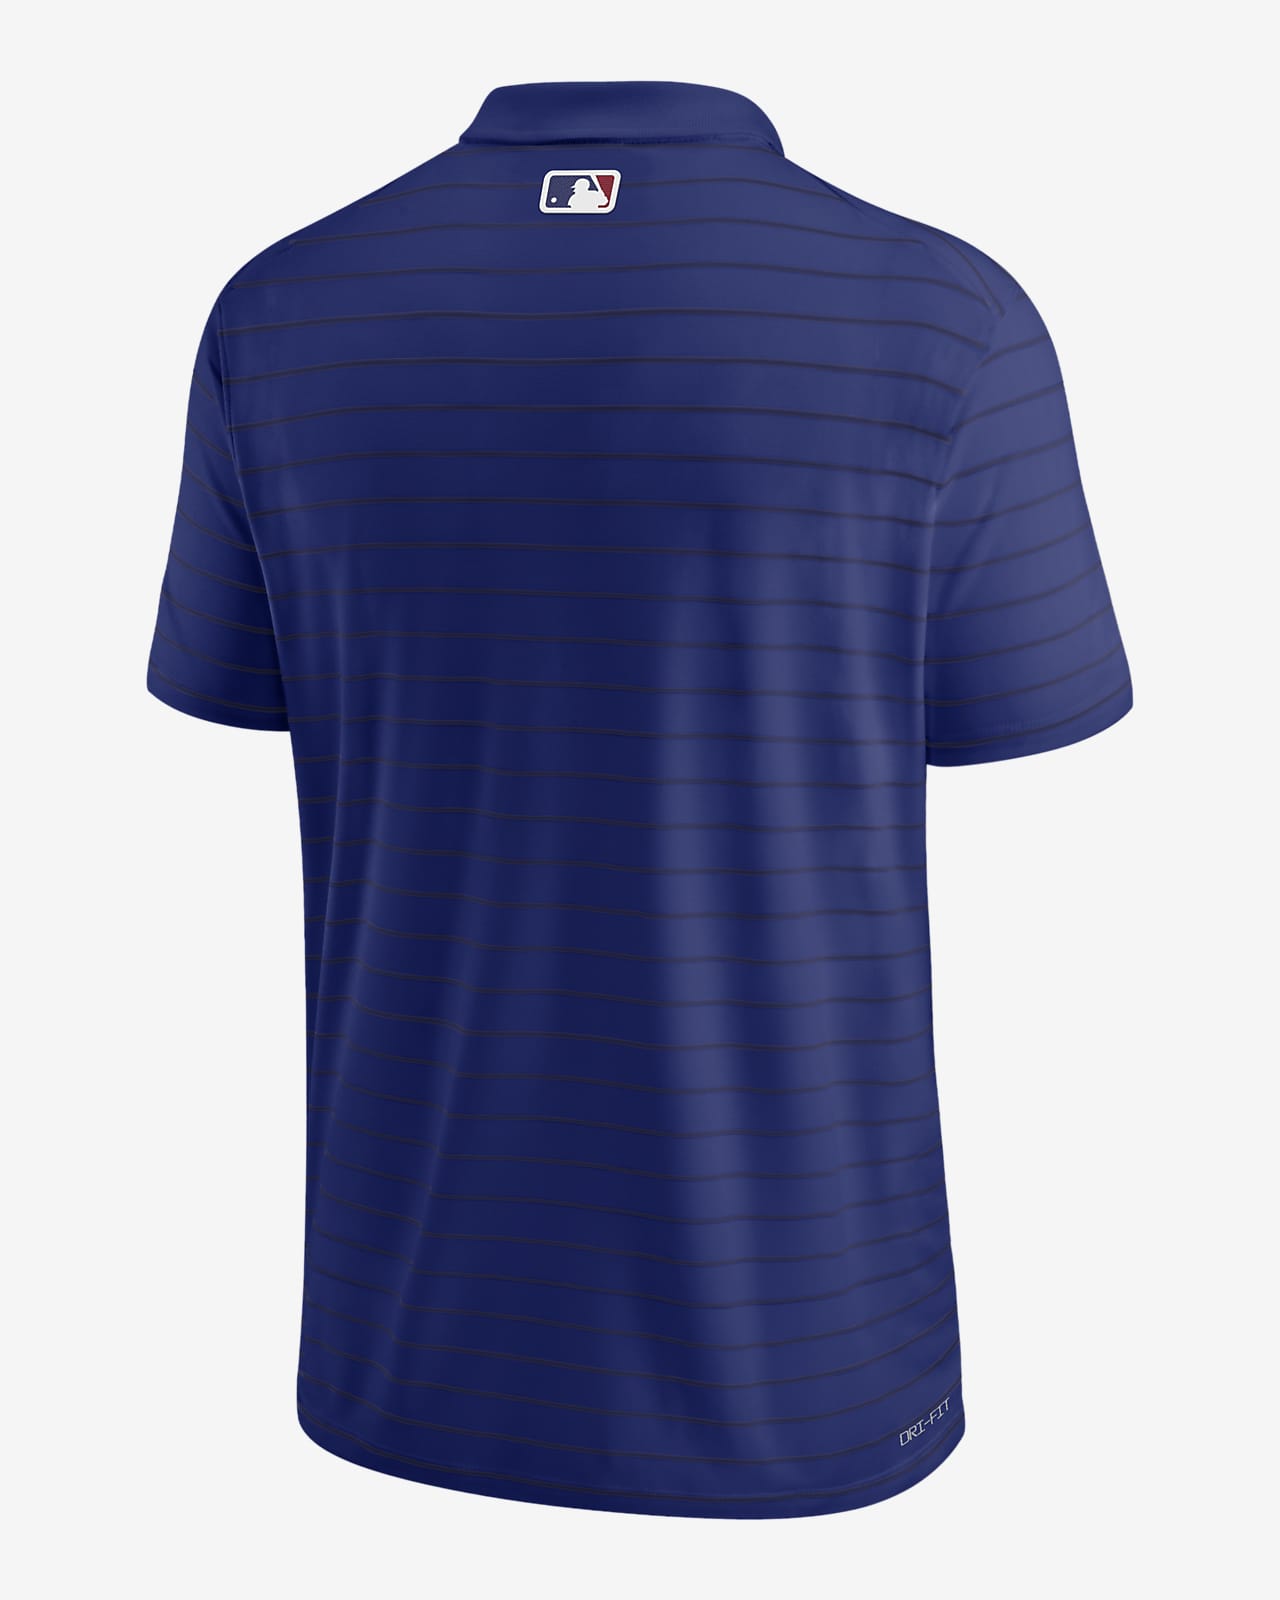 Nike Dri-FIT Victory Striped (MLB Los Angeles Dodgers) Men's Polo